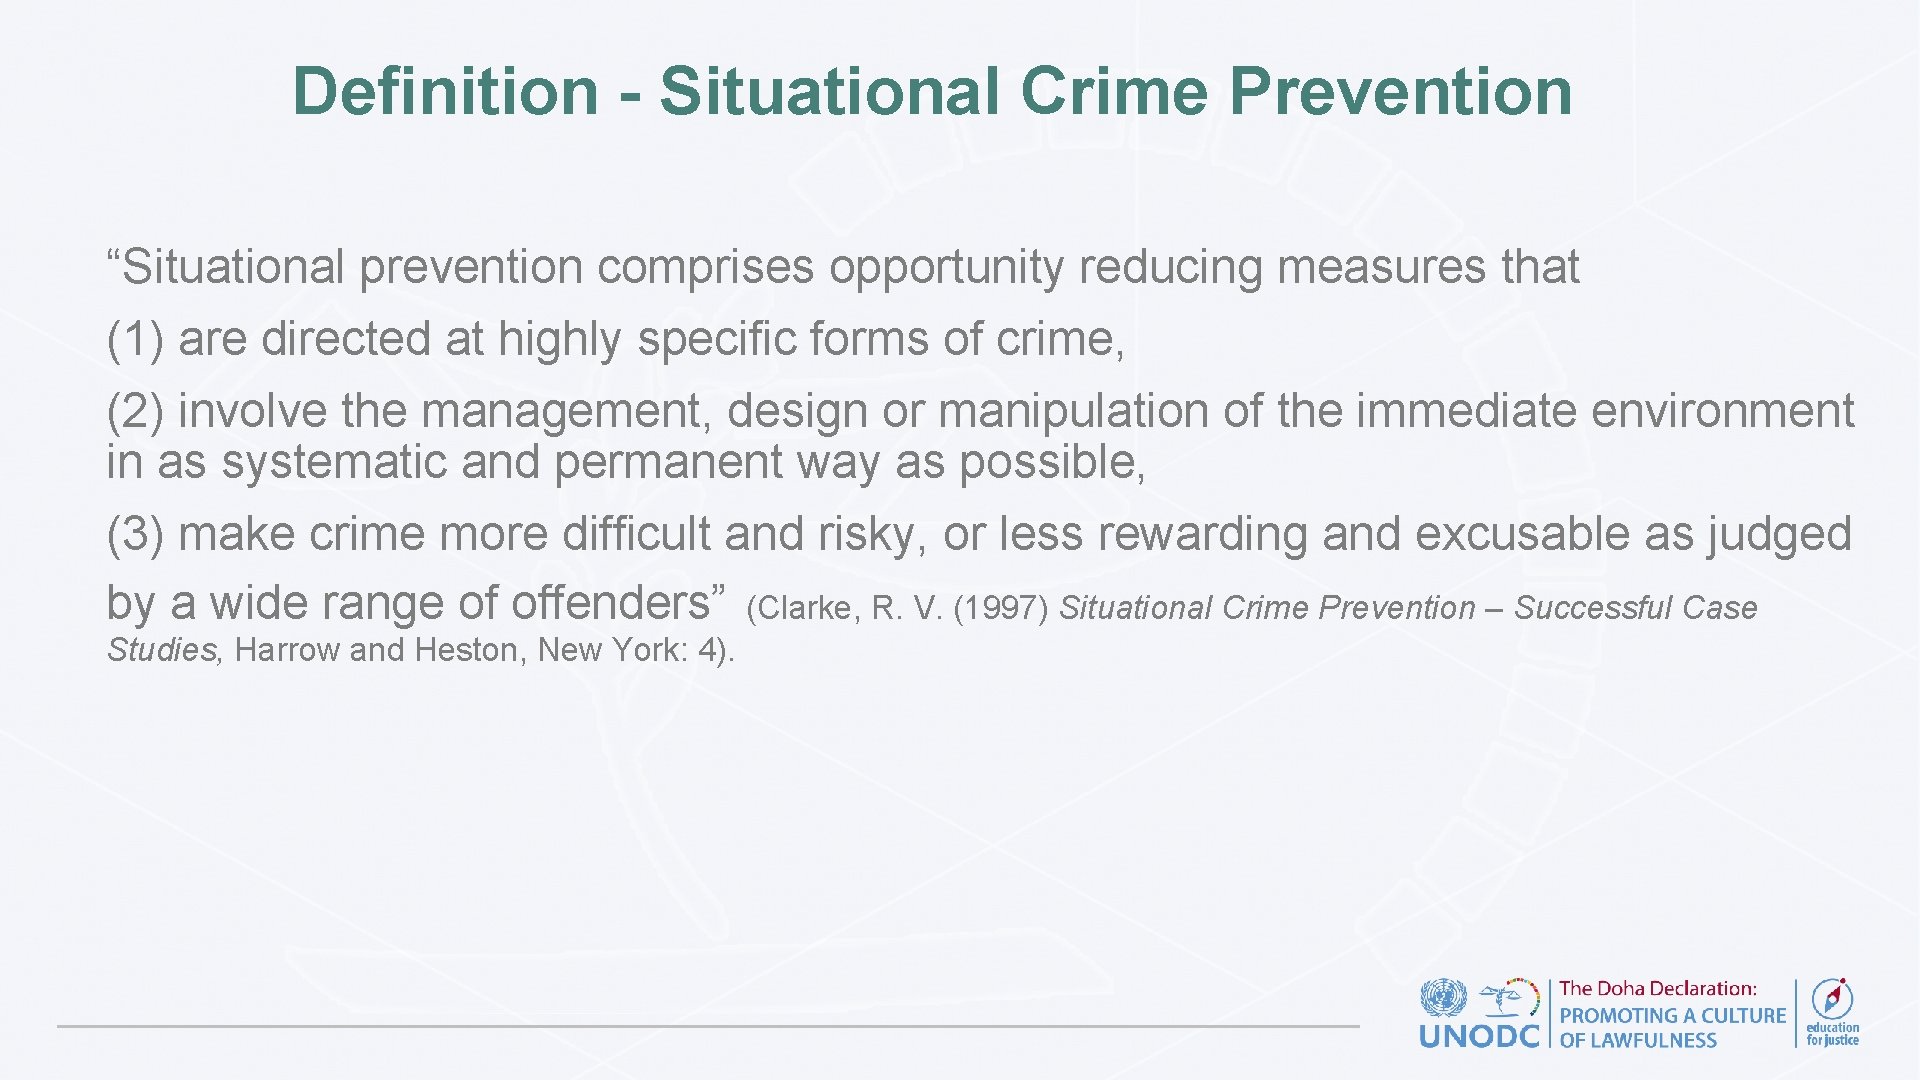 Definition - Situational Crime Prevention “Situational prevention comprises opportunity reducing measures that (1) are